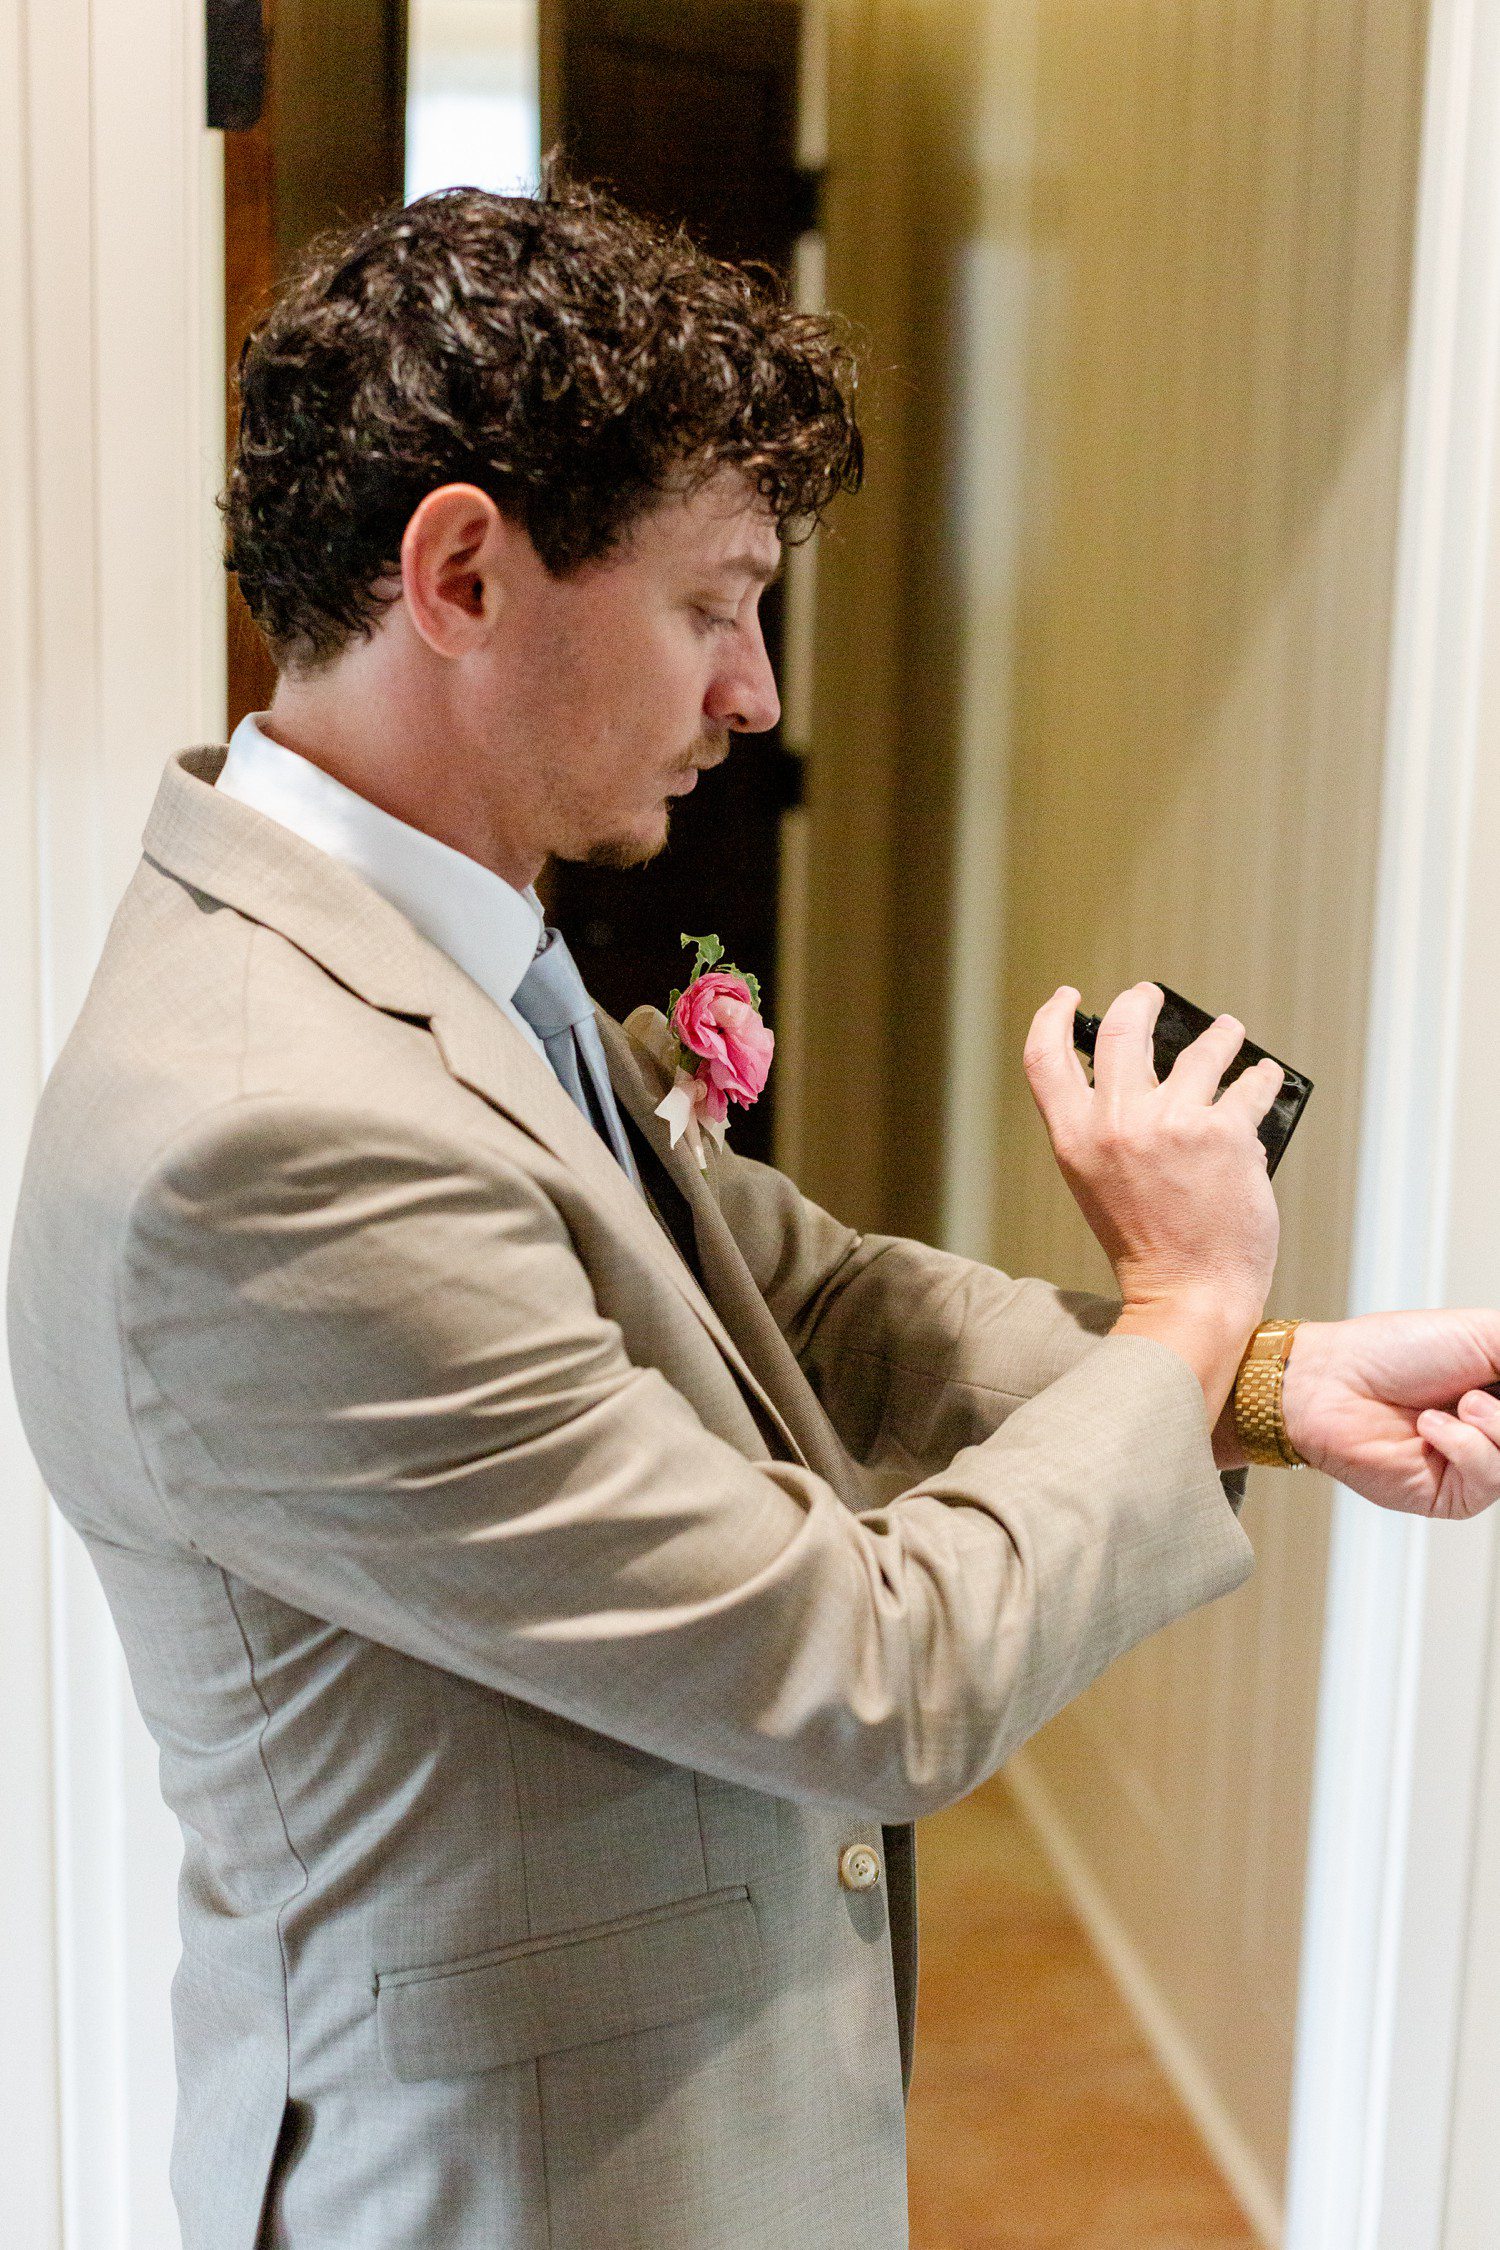 Groom putting on cologne for wedding day.